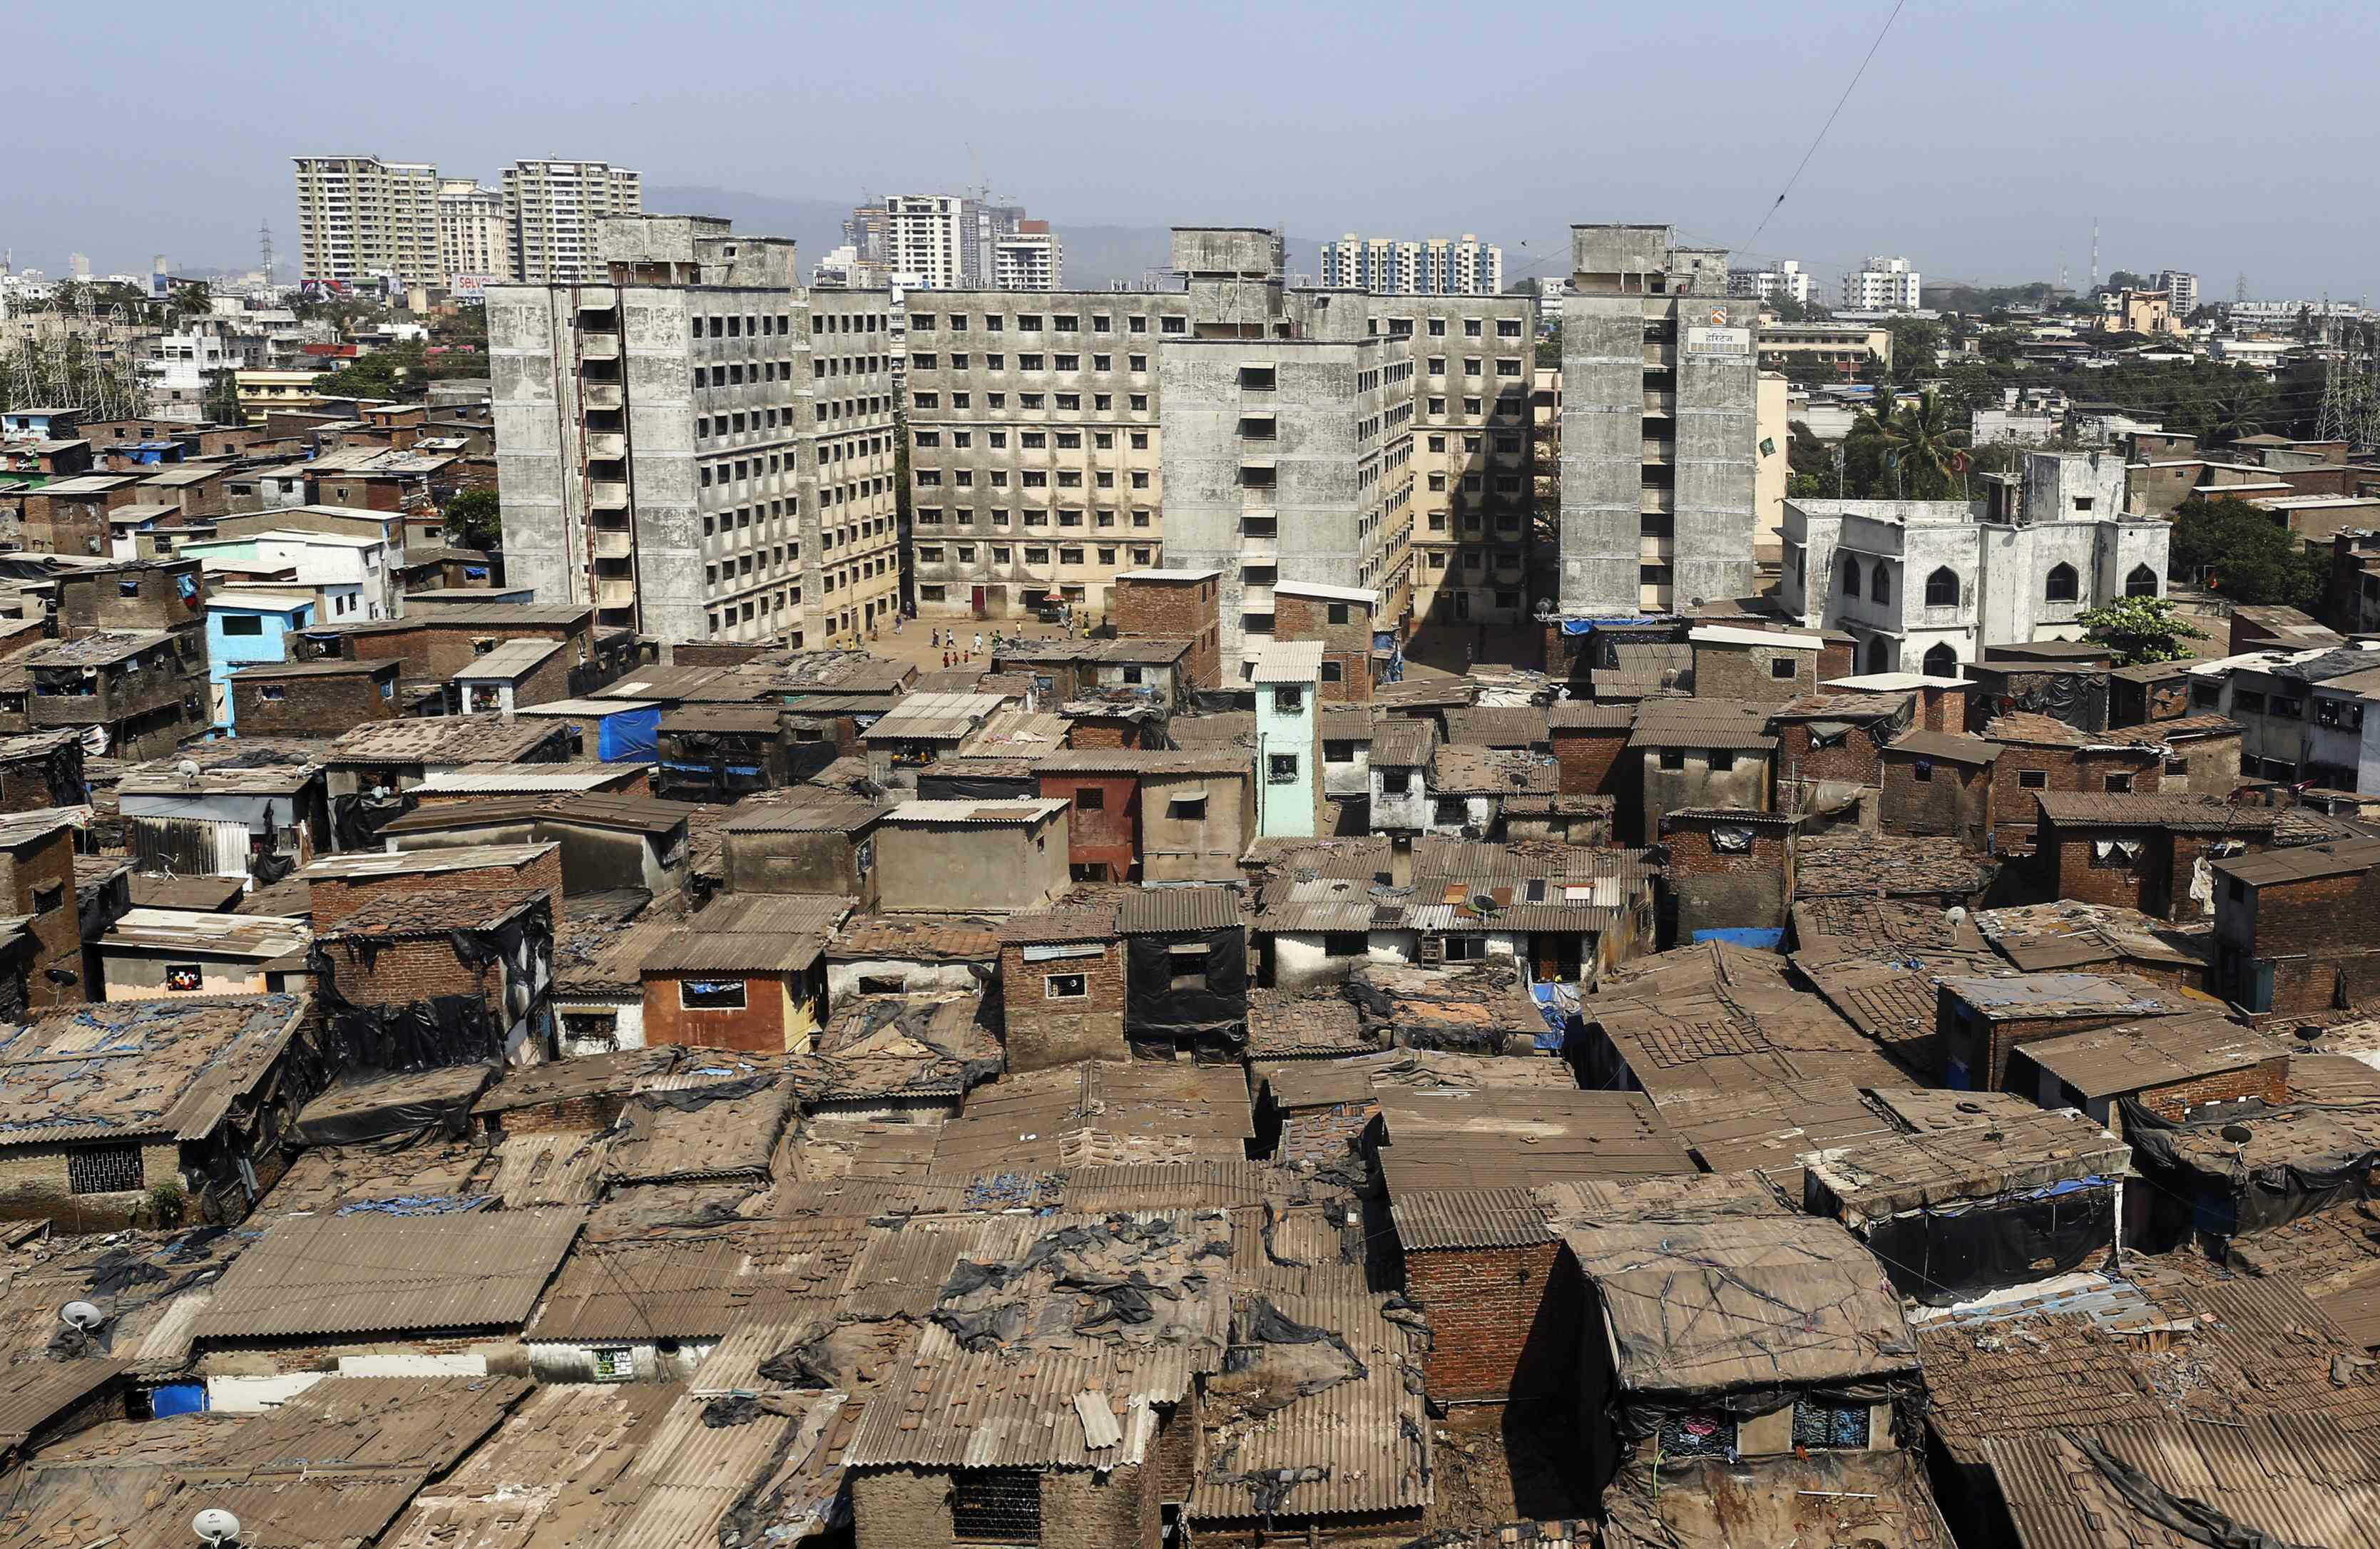 India urged to build housing law on human rights